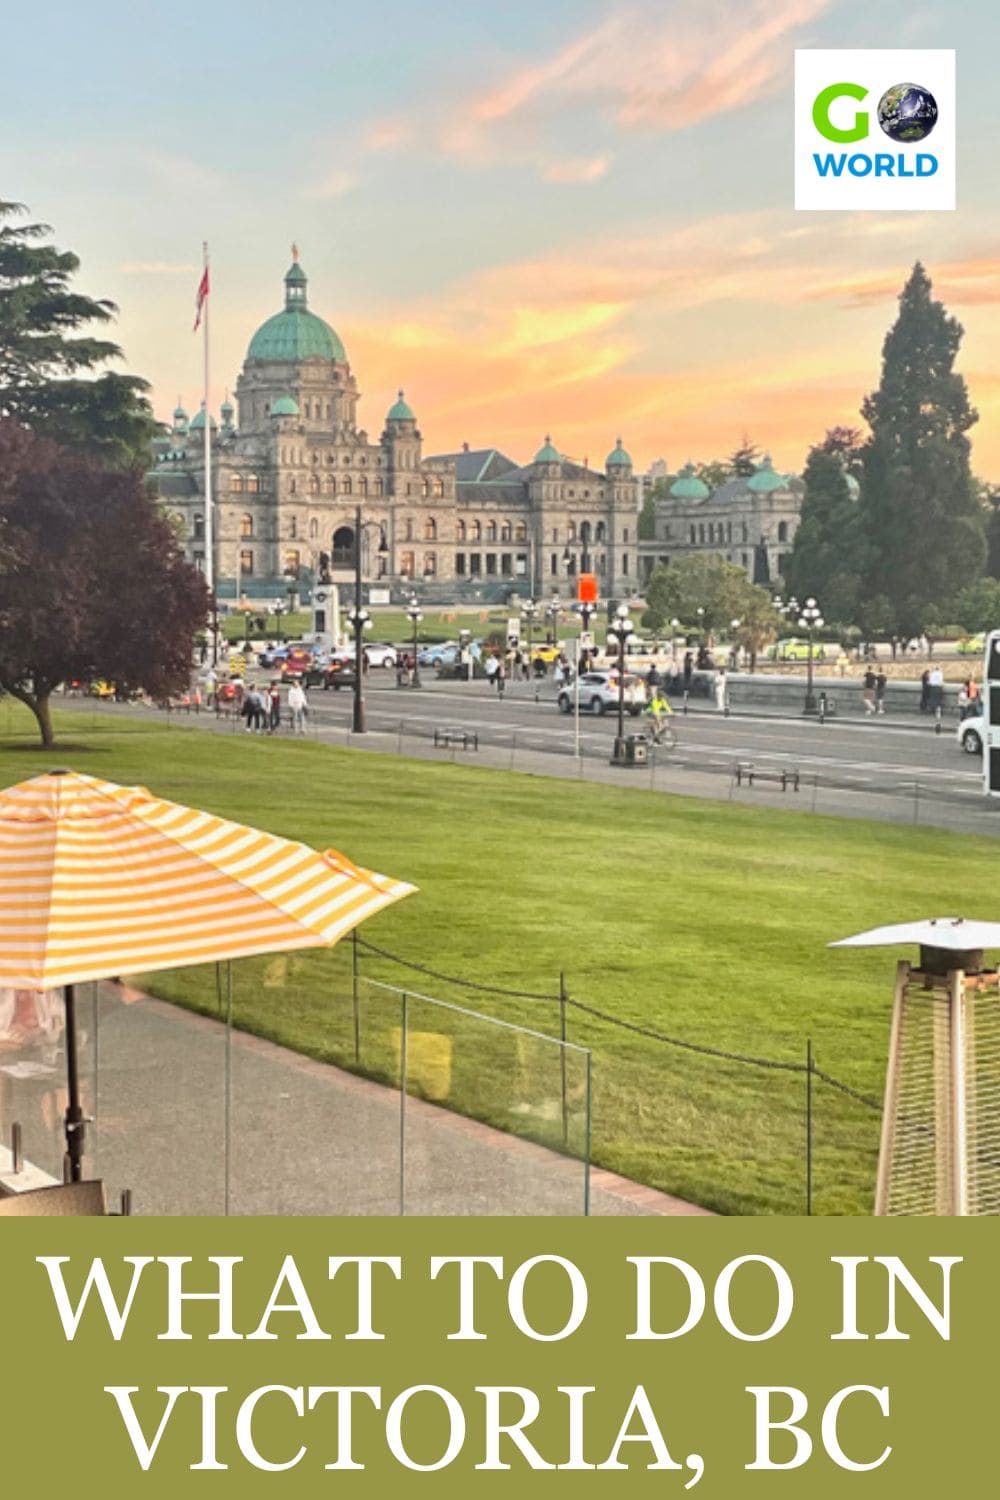 Waterfront British-inspired Victoria boasts old world architecture, blooming gardens, miles of bike paths and a lively food and drink scene. #BC #VictoriaBC